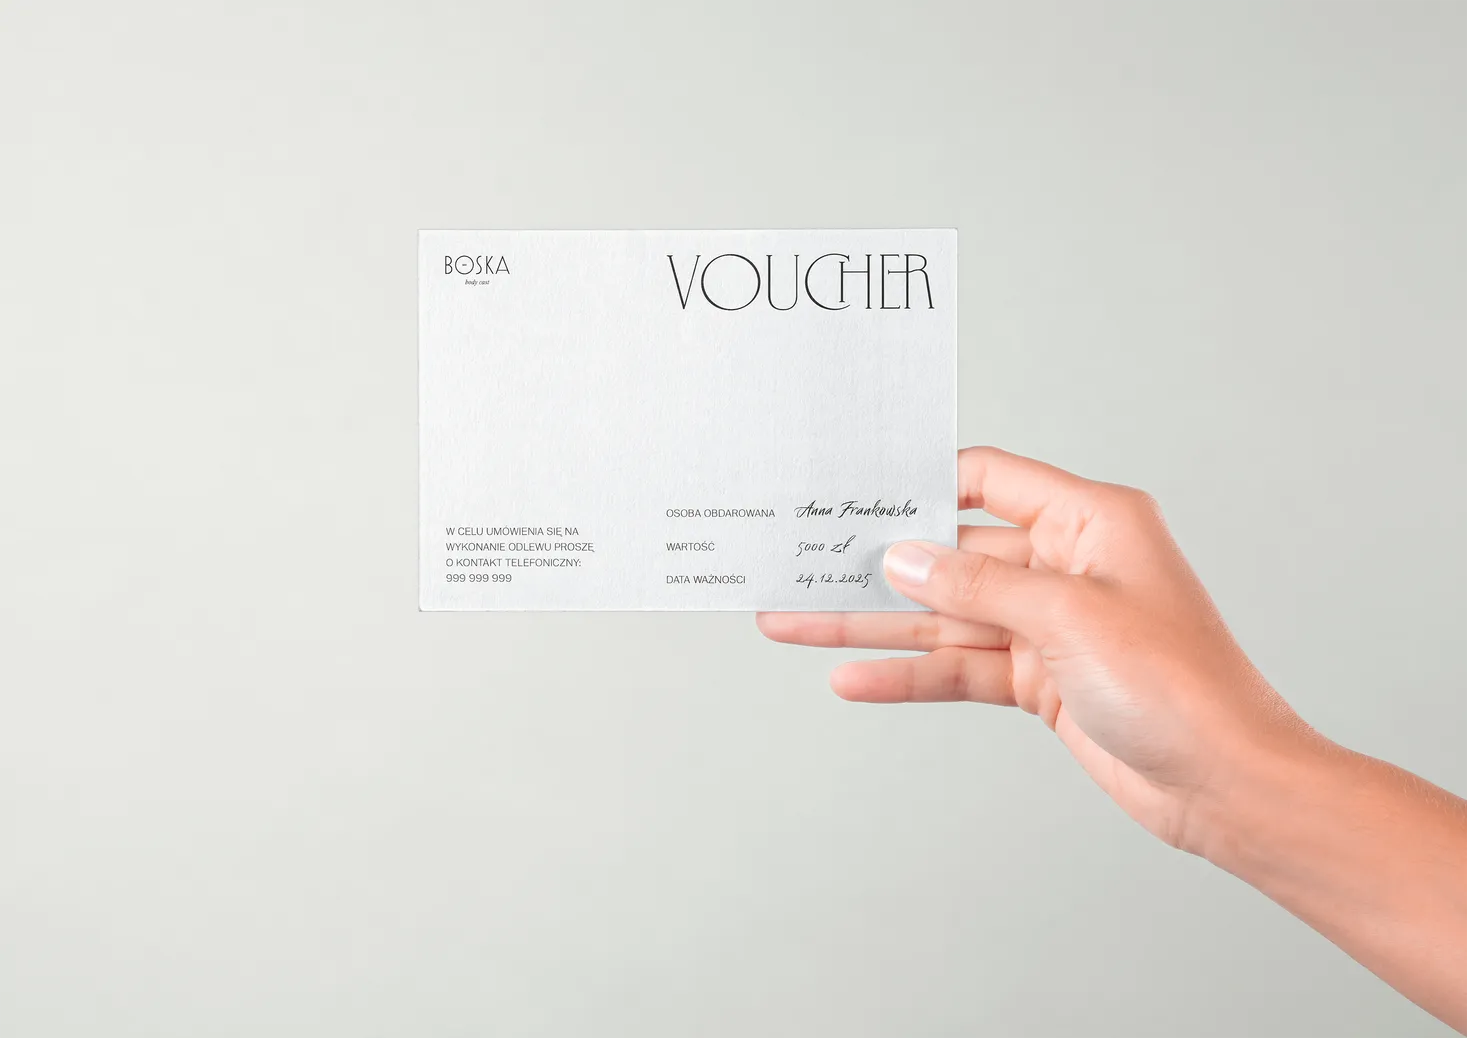 a hand holding a voucher in minimalistic design printed on a white textured paper